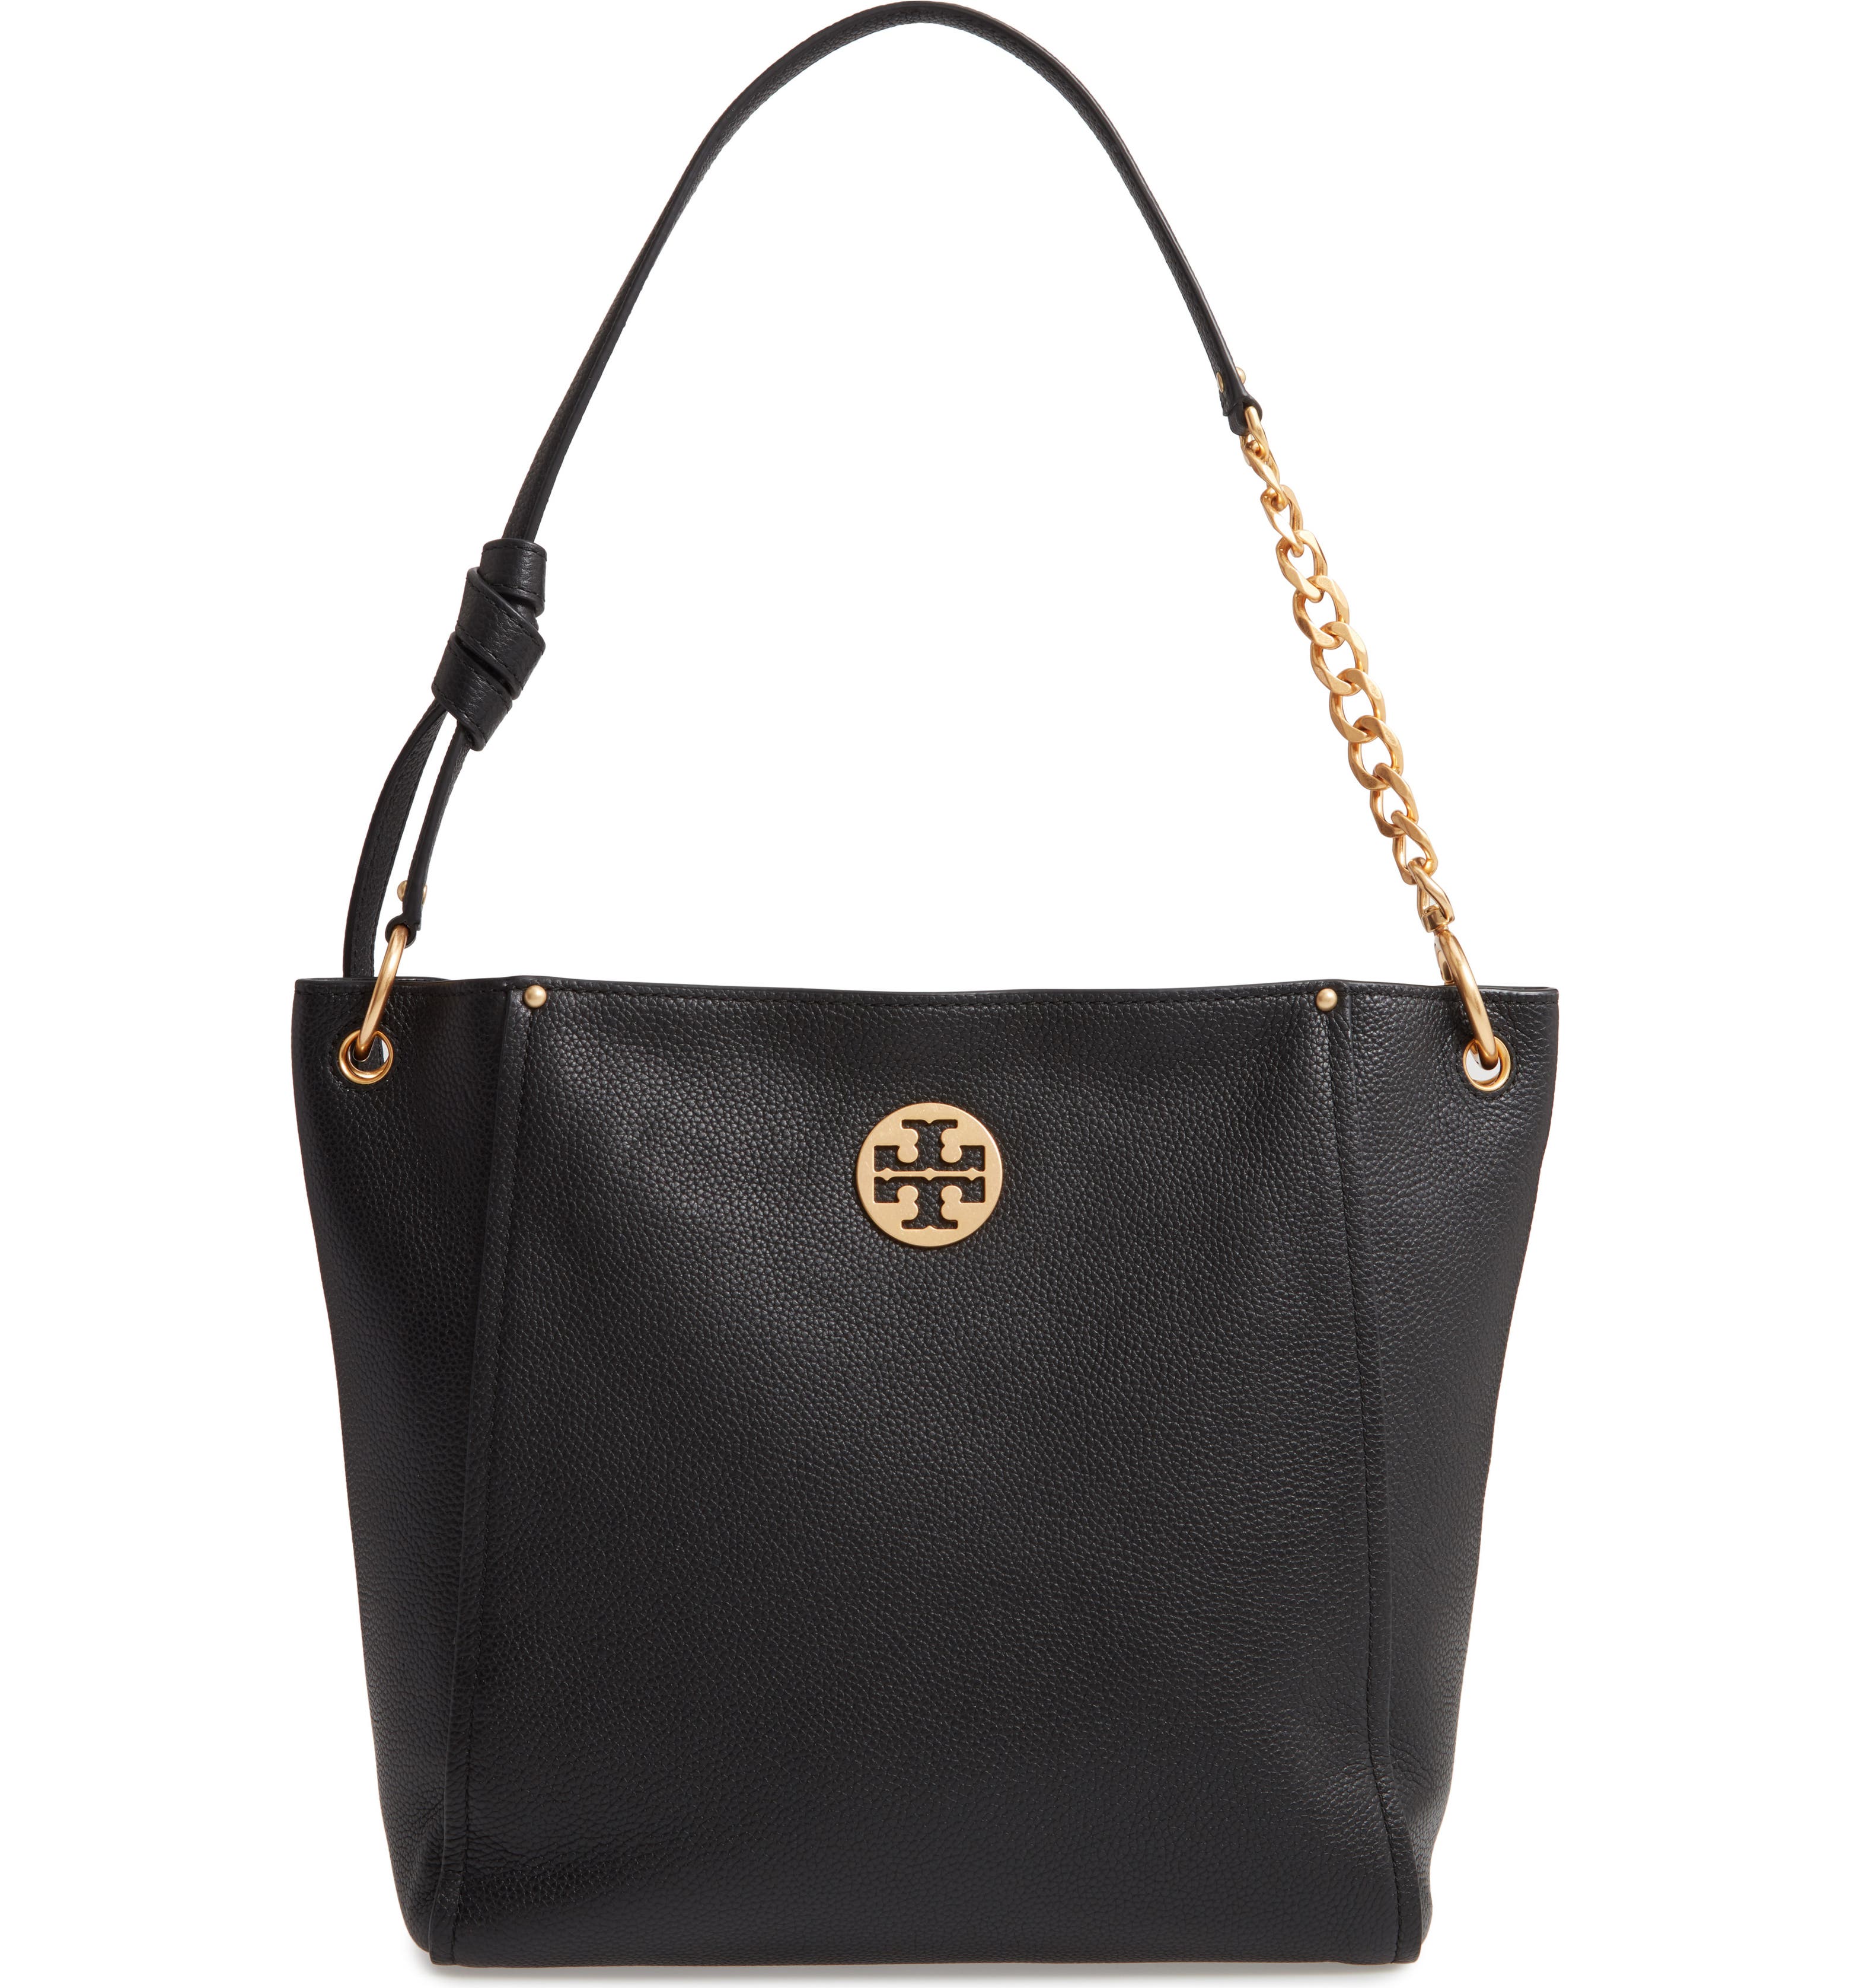 Tory Burch Everly Leather Hobo | Nordstrom